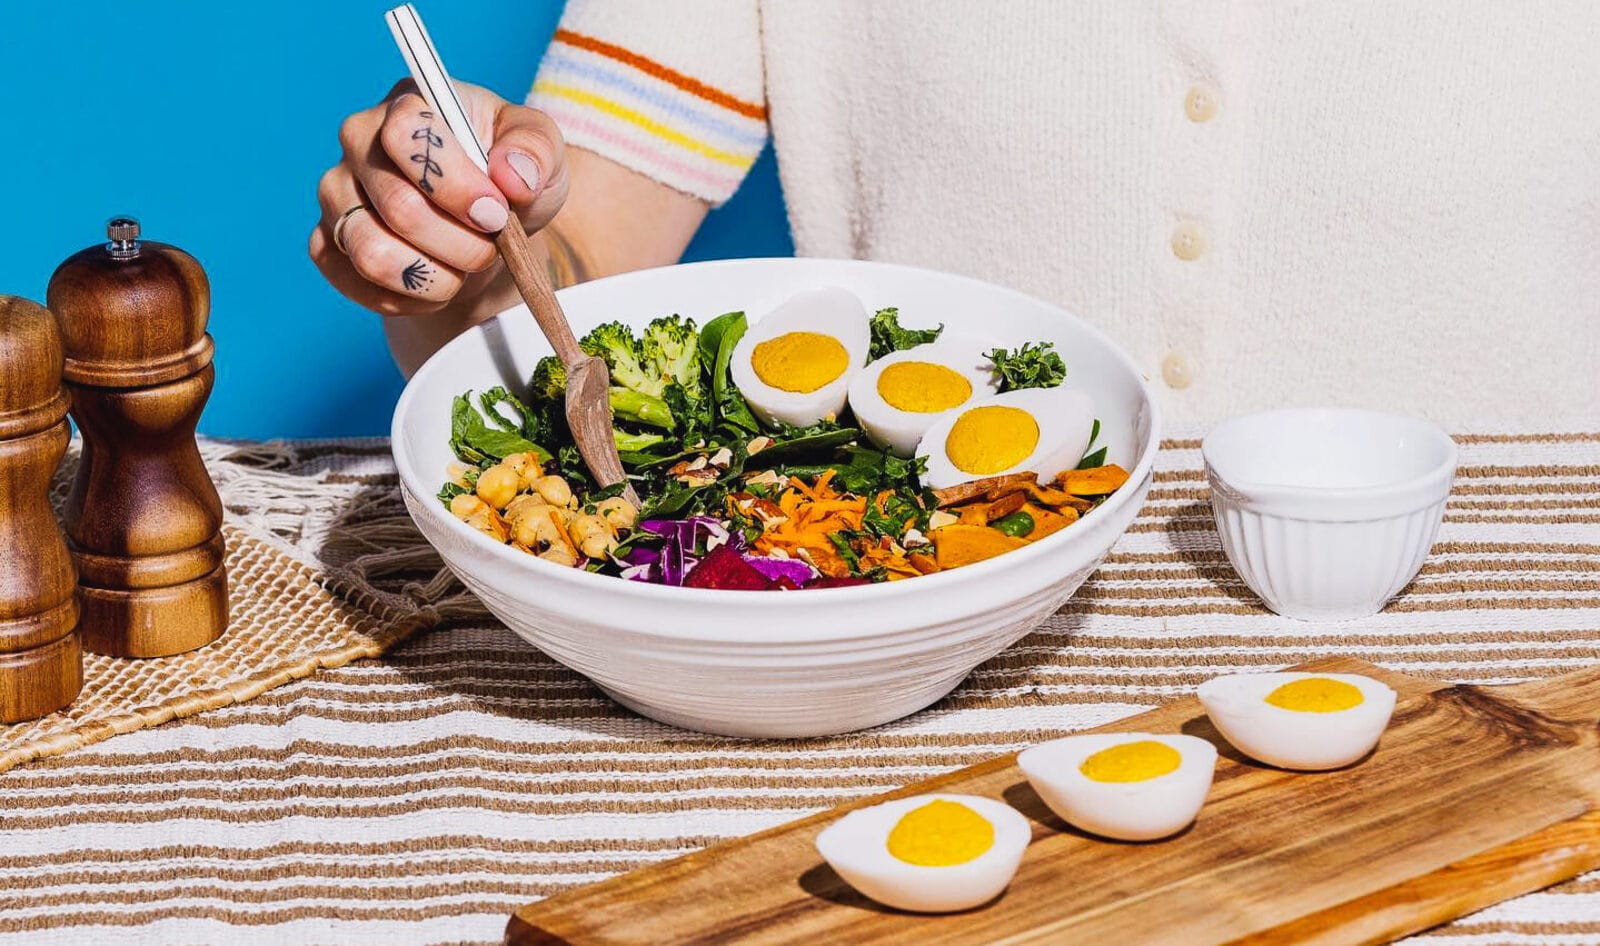 How Do You Make Vegan Hard-Boiled Eggs? These Startups Have the Answer.